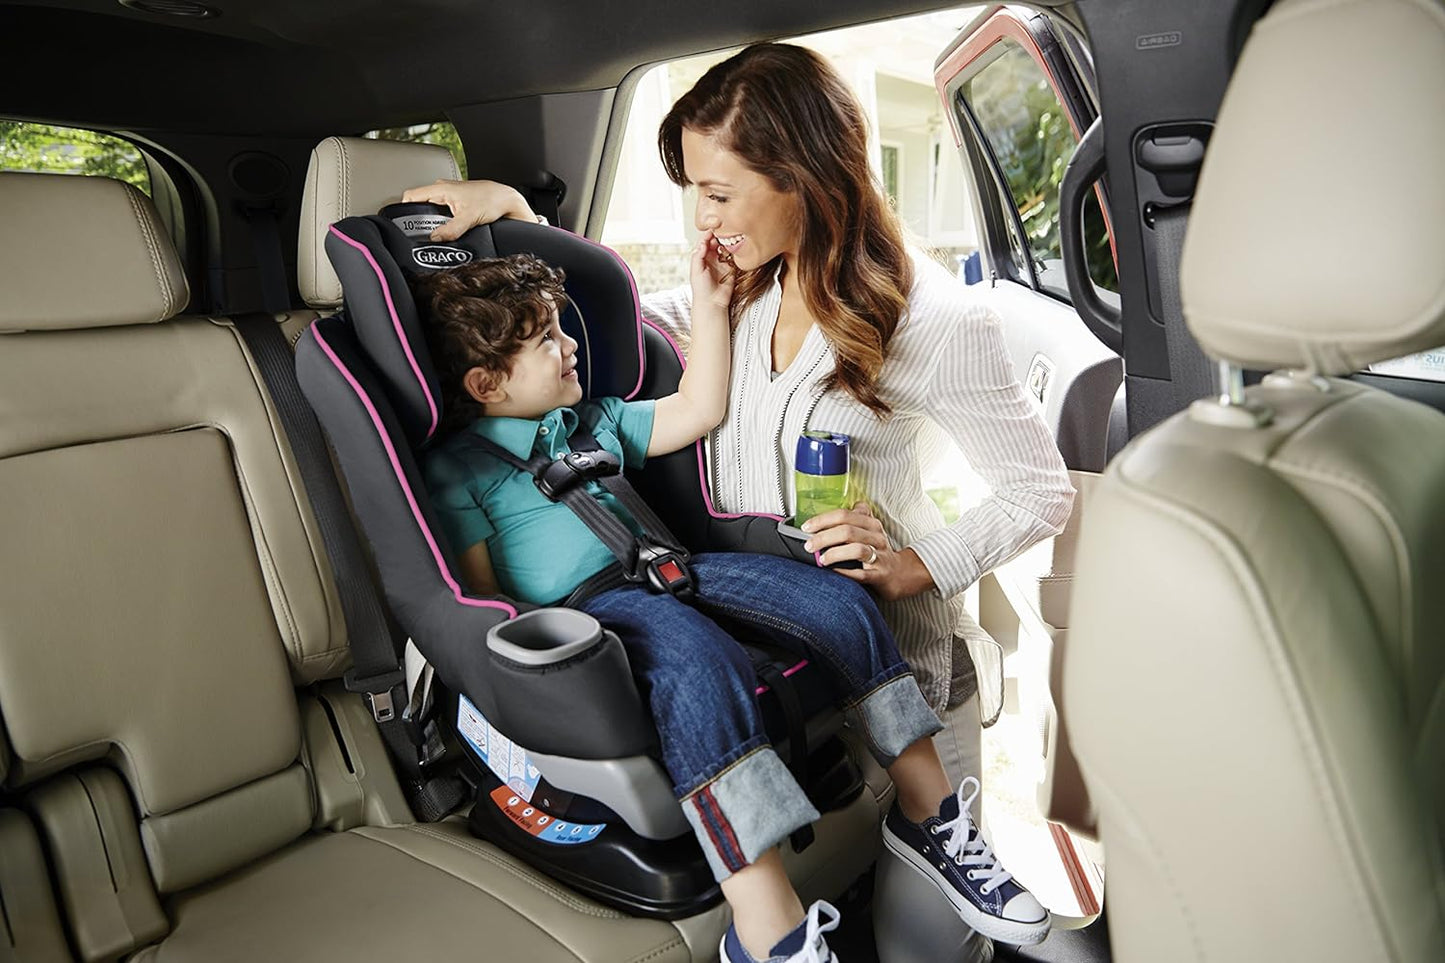 Graco Extend2Fit 3-in-1 Car Seat 🚗 - Ultimate Safety & Versatility